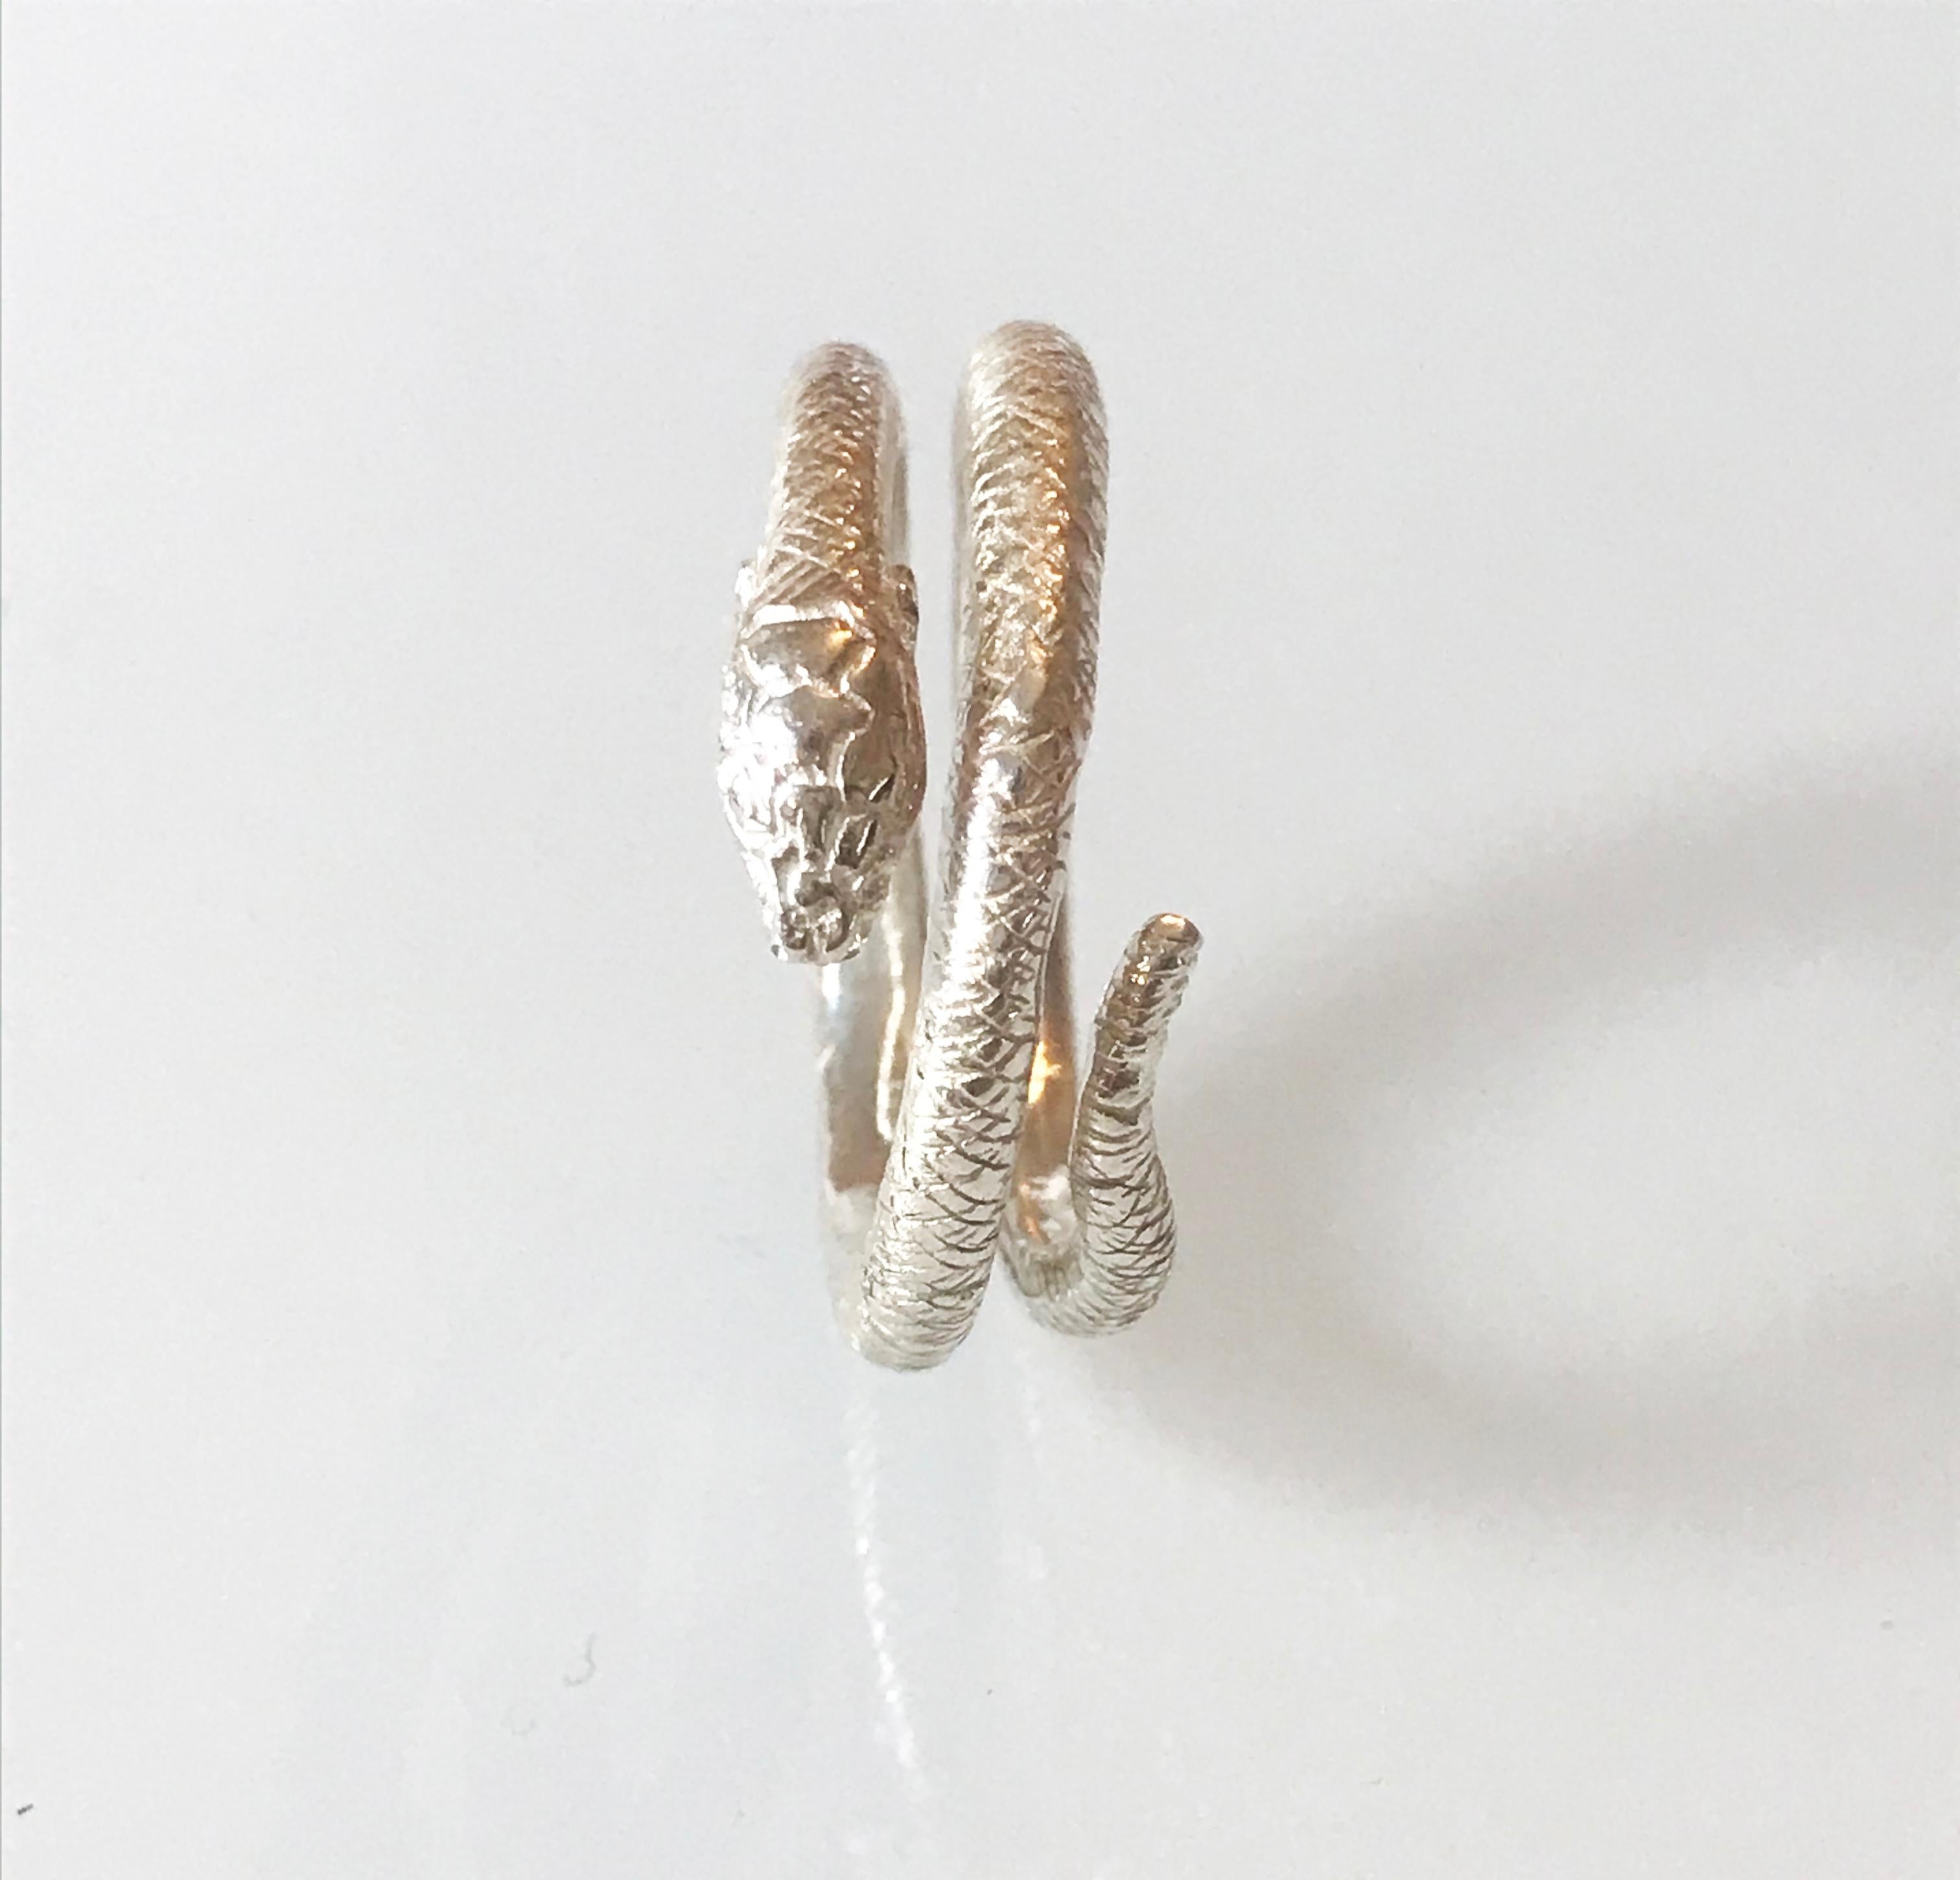 Egyptian Revival The Egyptian Wadjet Coiled Snake Ring in Sterling Silver